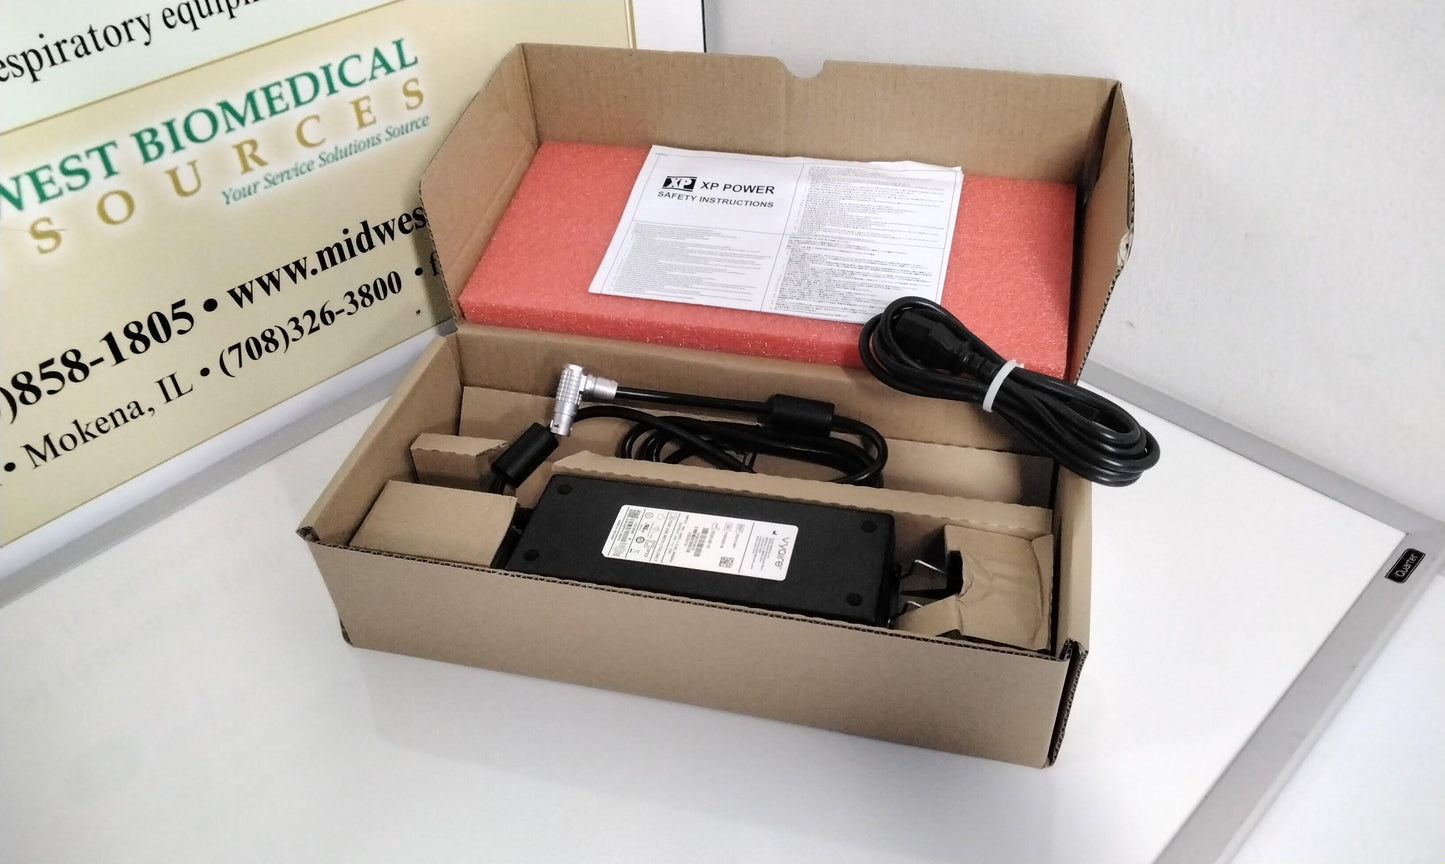 NEW Vyaire LTV 2 Power Supply with Power Cord 25312-001 with Free Shipping and Warranty - MBR Medicals